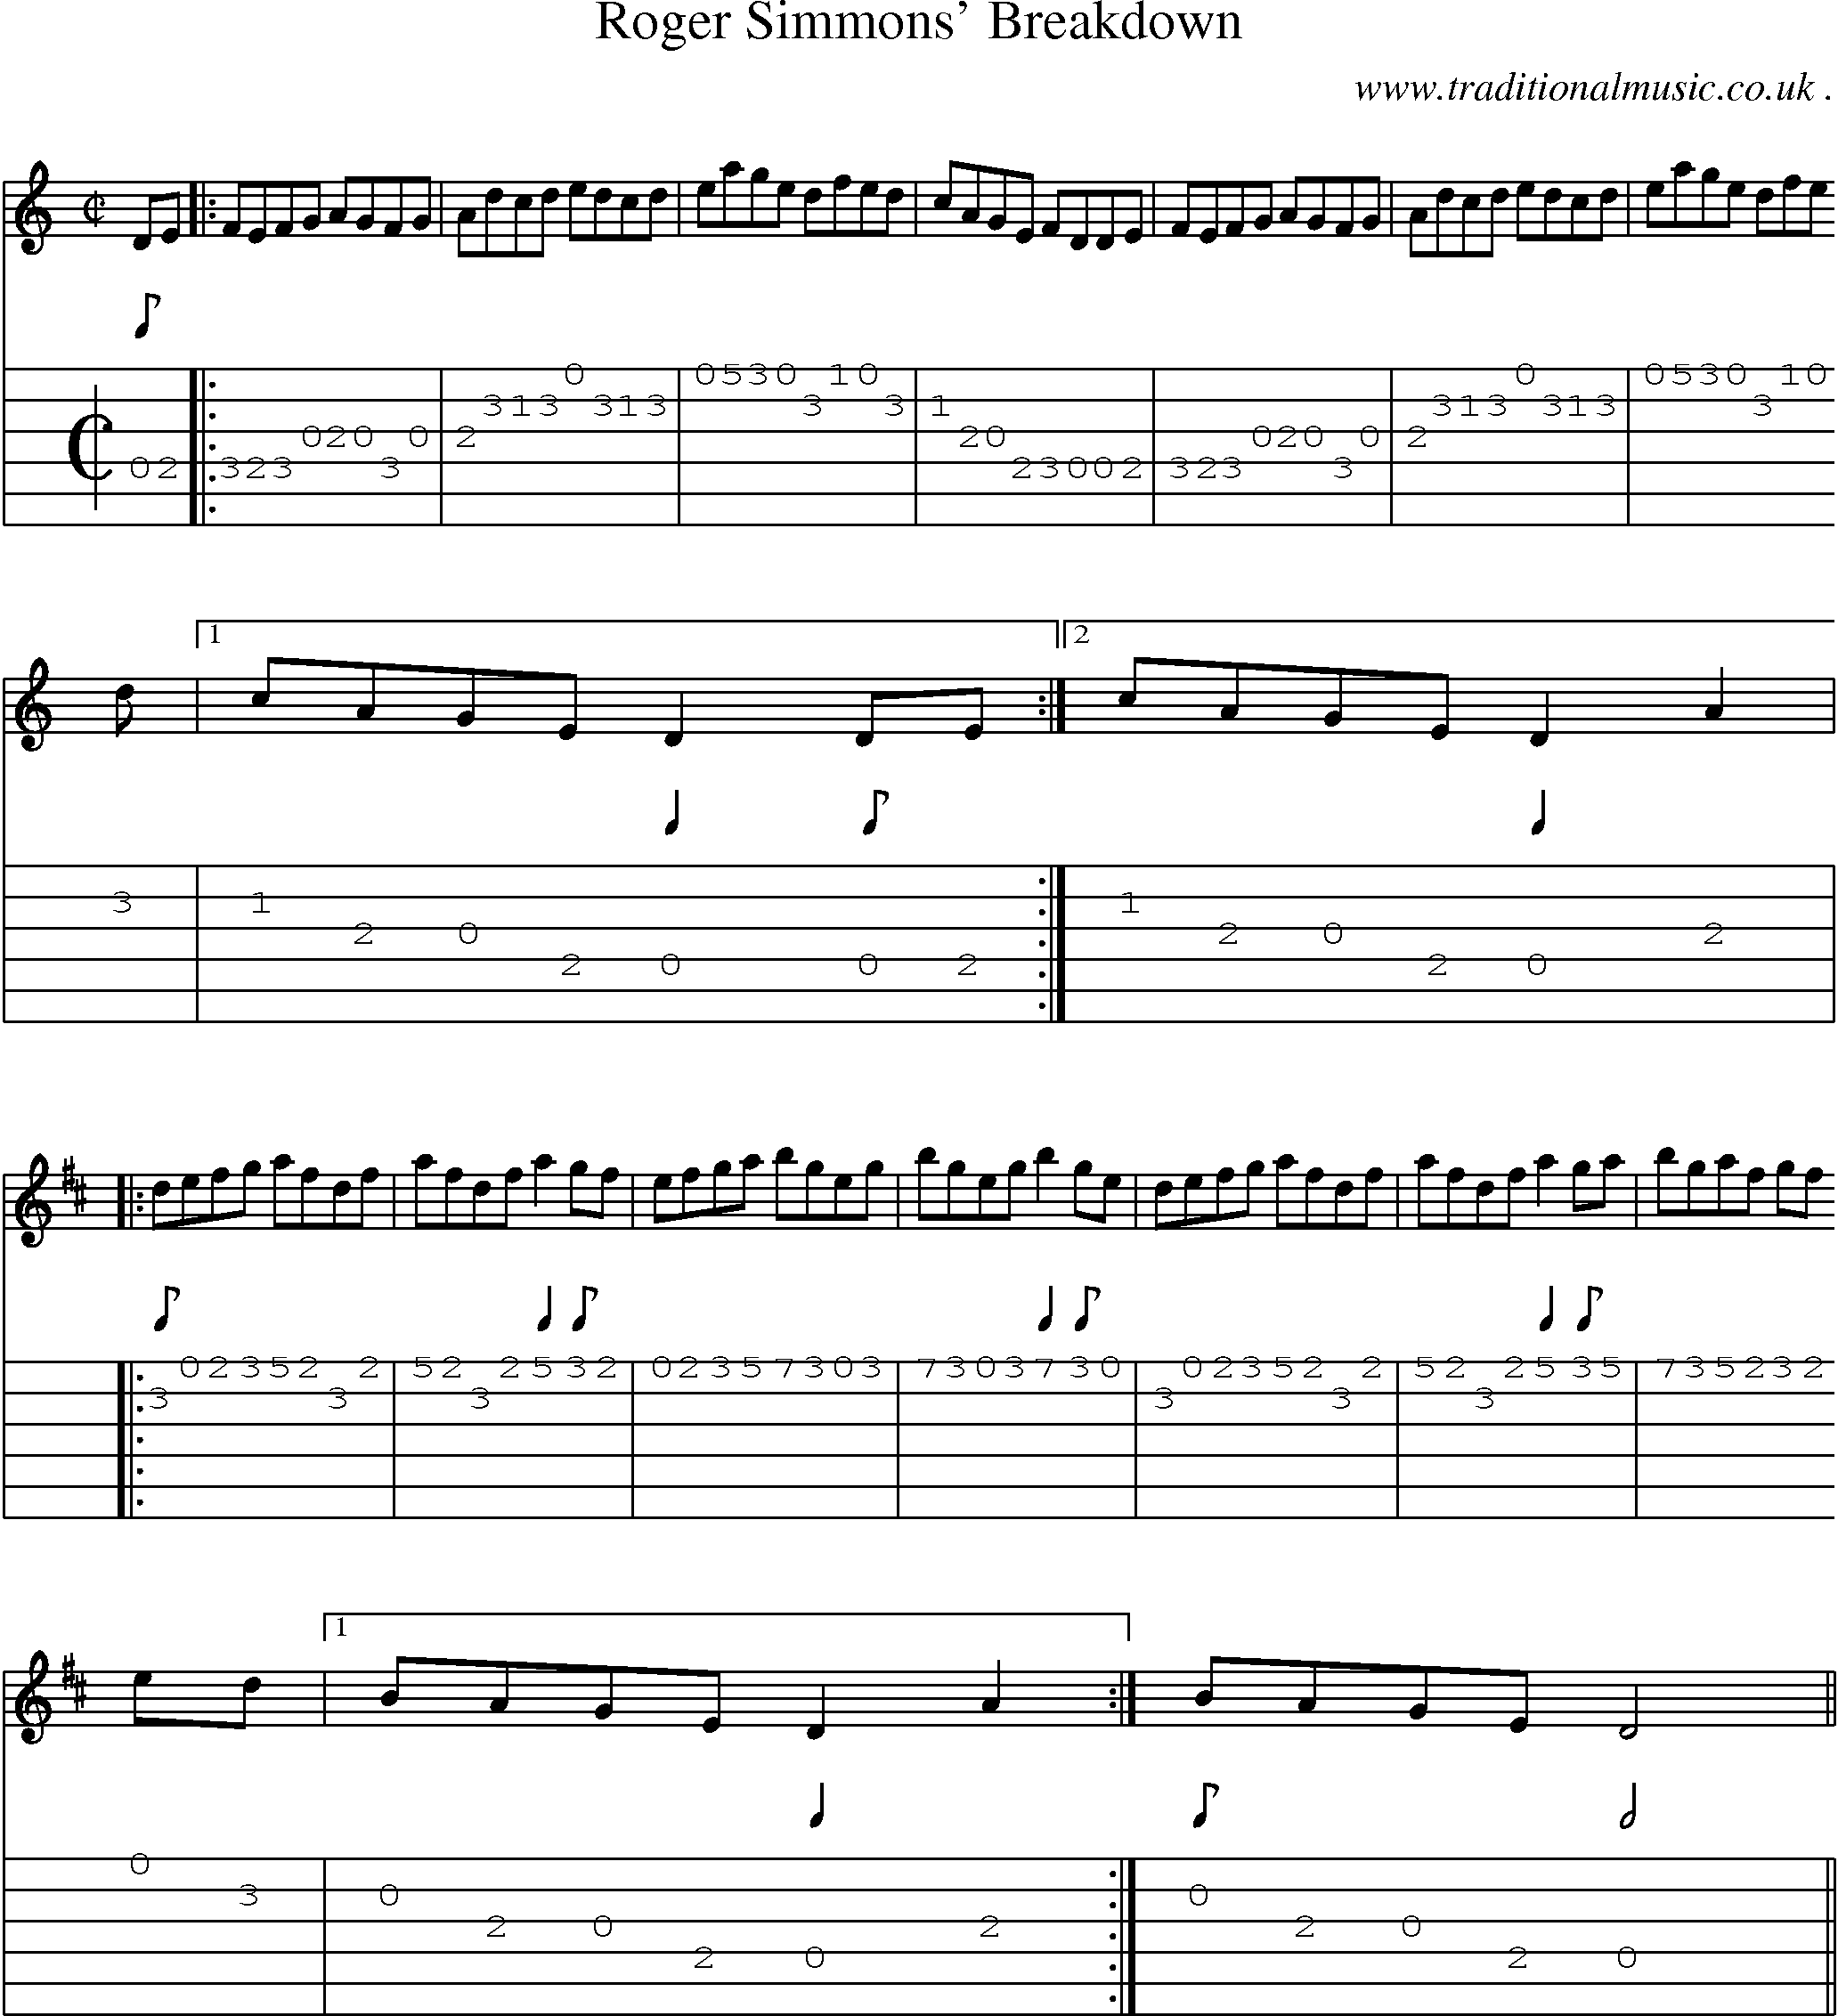 Sheet-Music and Guitar Tabs for Roger Simmons Breakdown